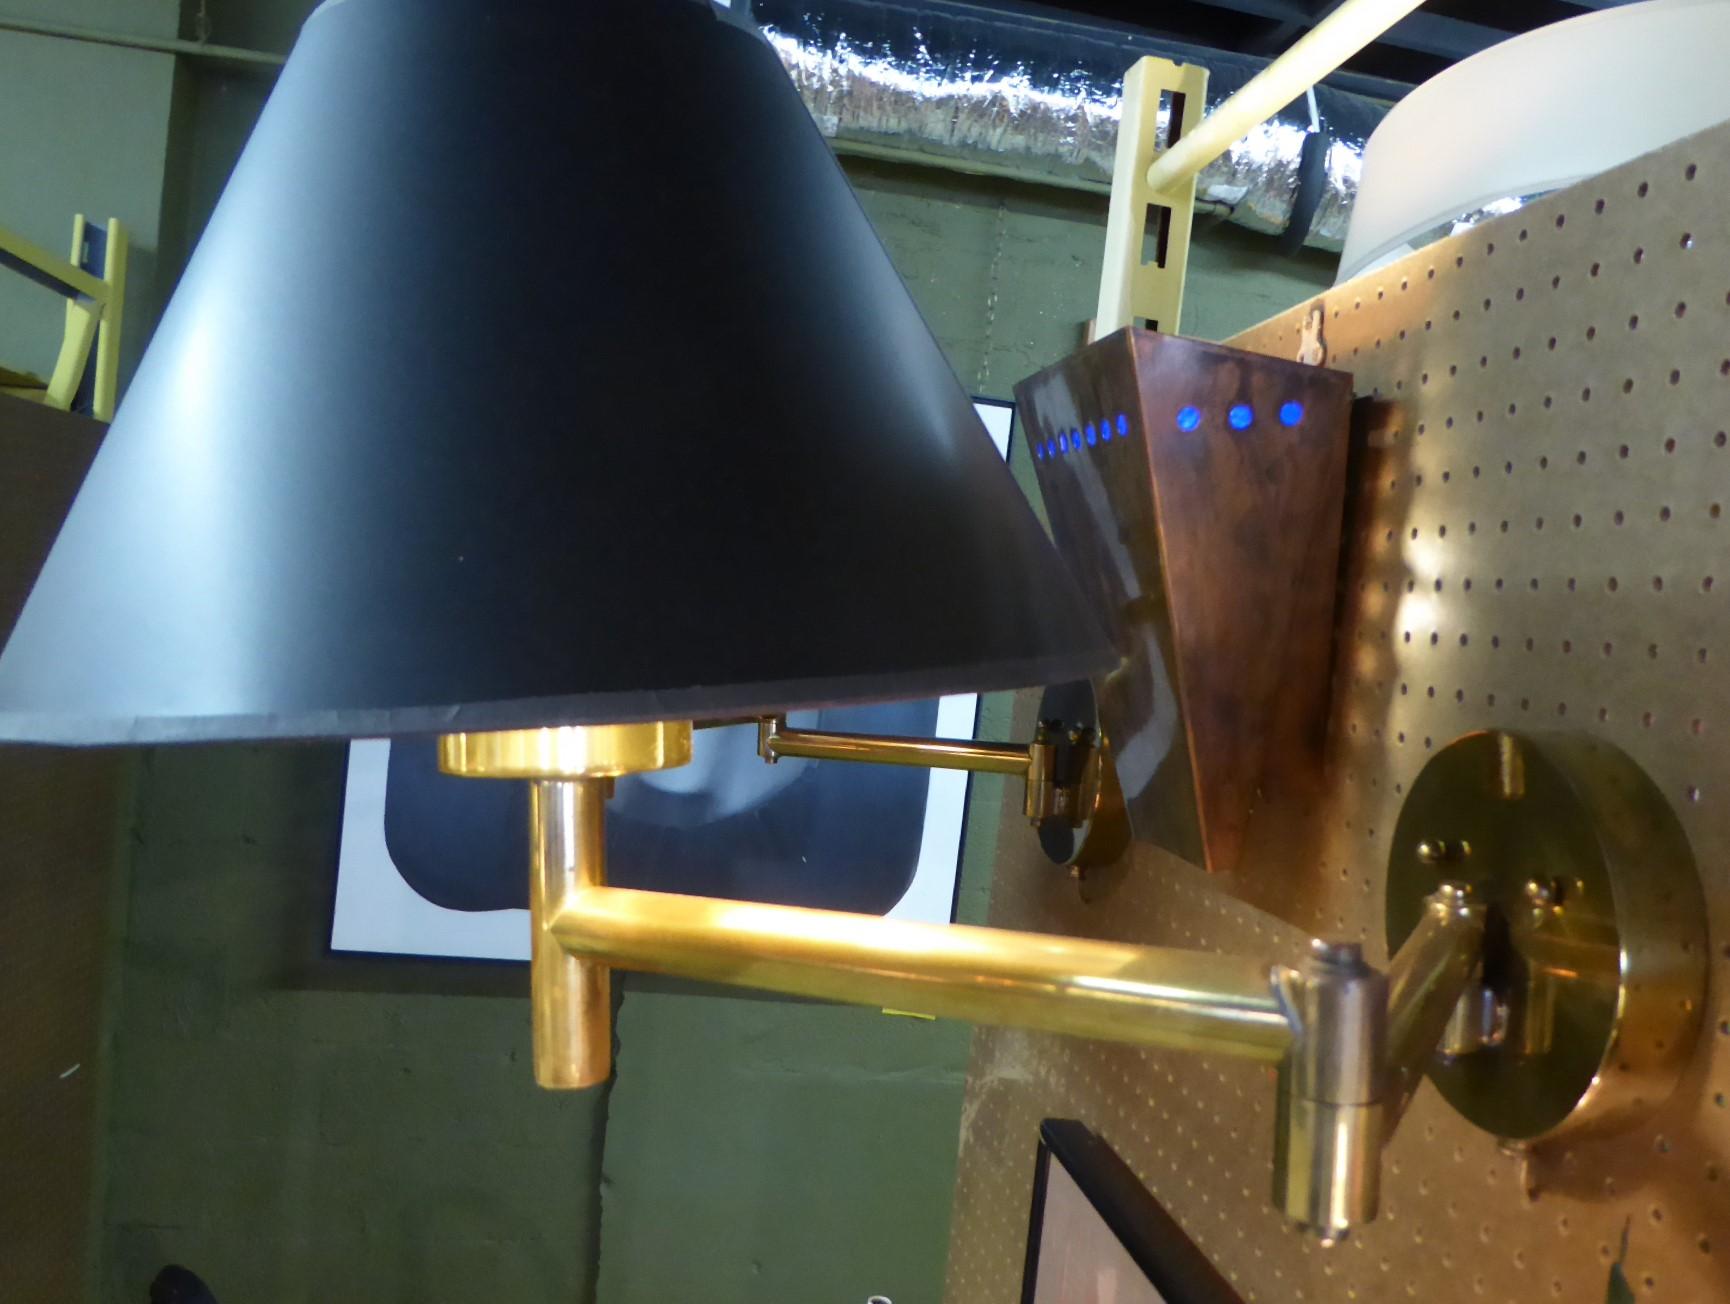 Pair of Large Mid Century Modern Brass Swing Arm Wall Lights or Sconces.  These elegant and lux sconces are attibuted to Hart Associates due to their workmanship and the quality of materials that has been connected with Hart’s products  since 1965. 